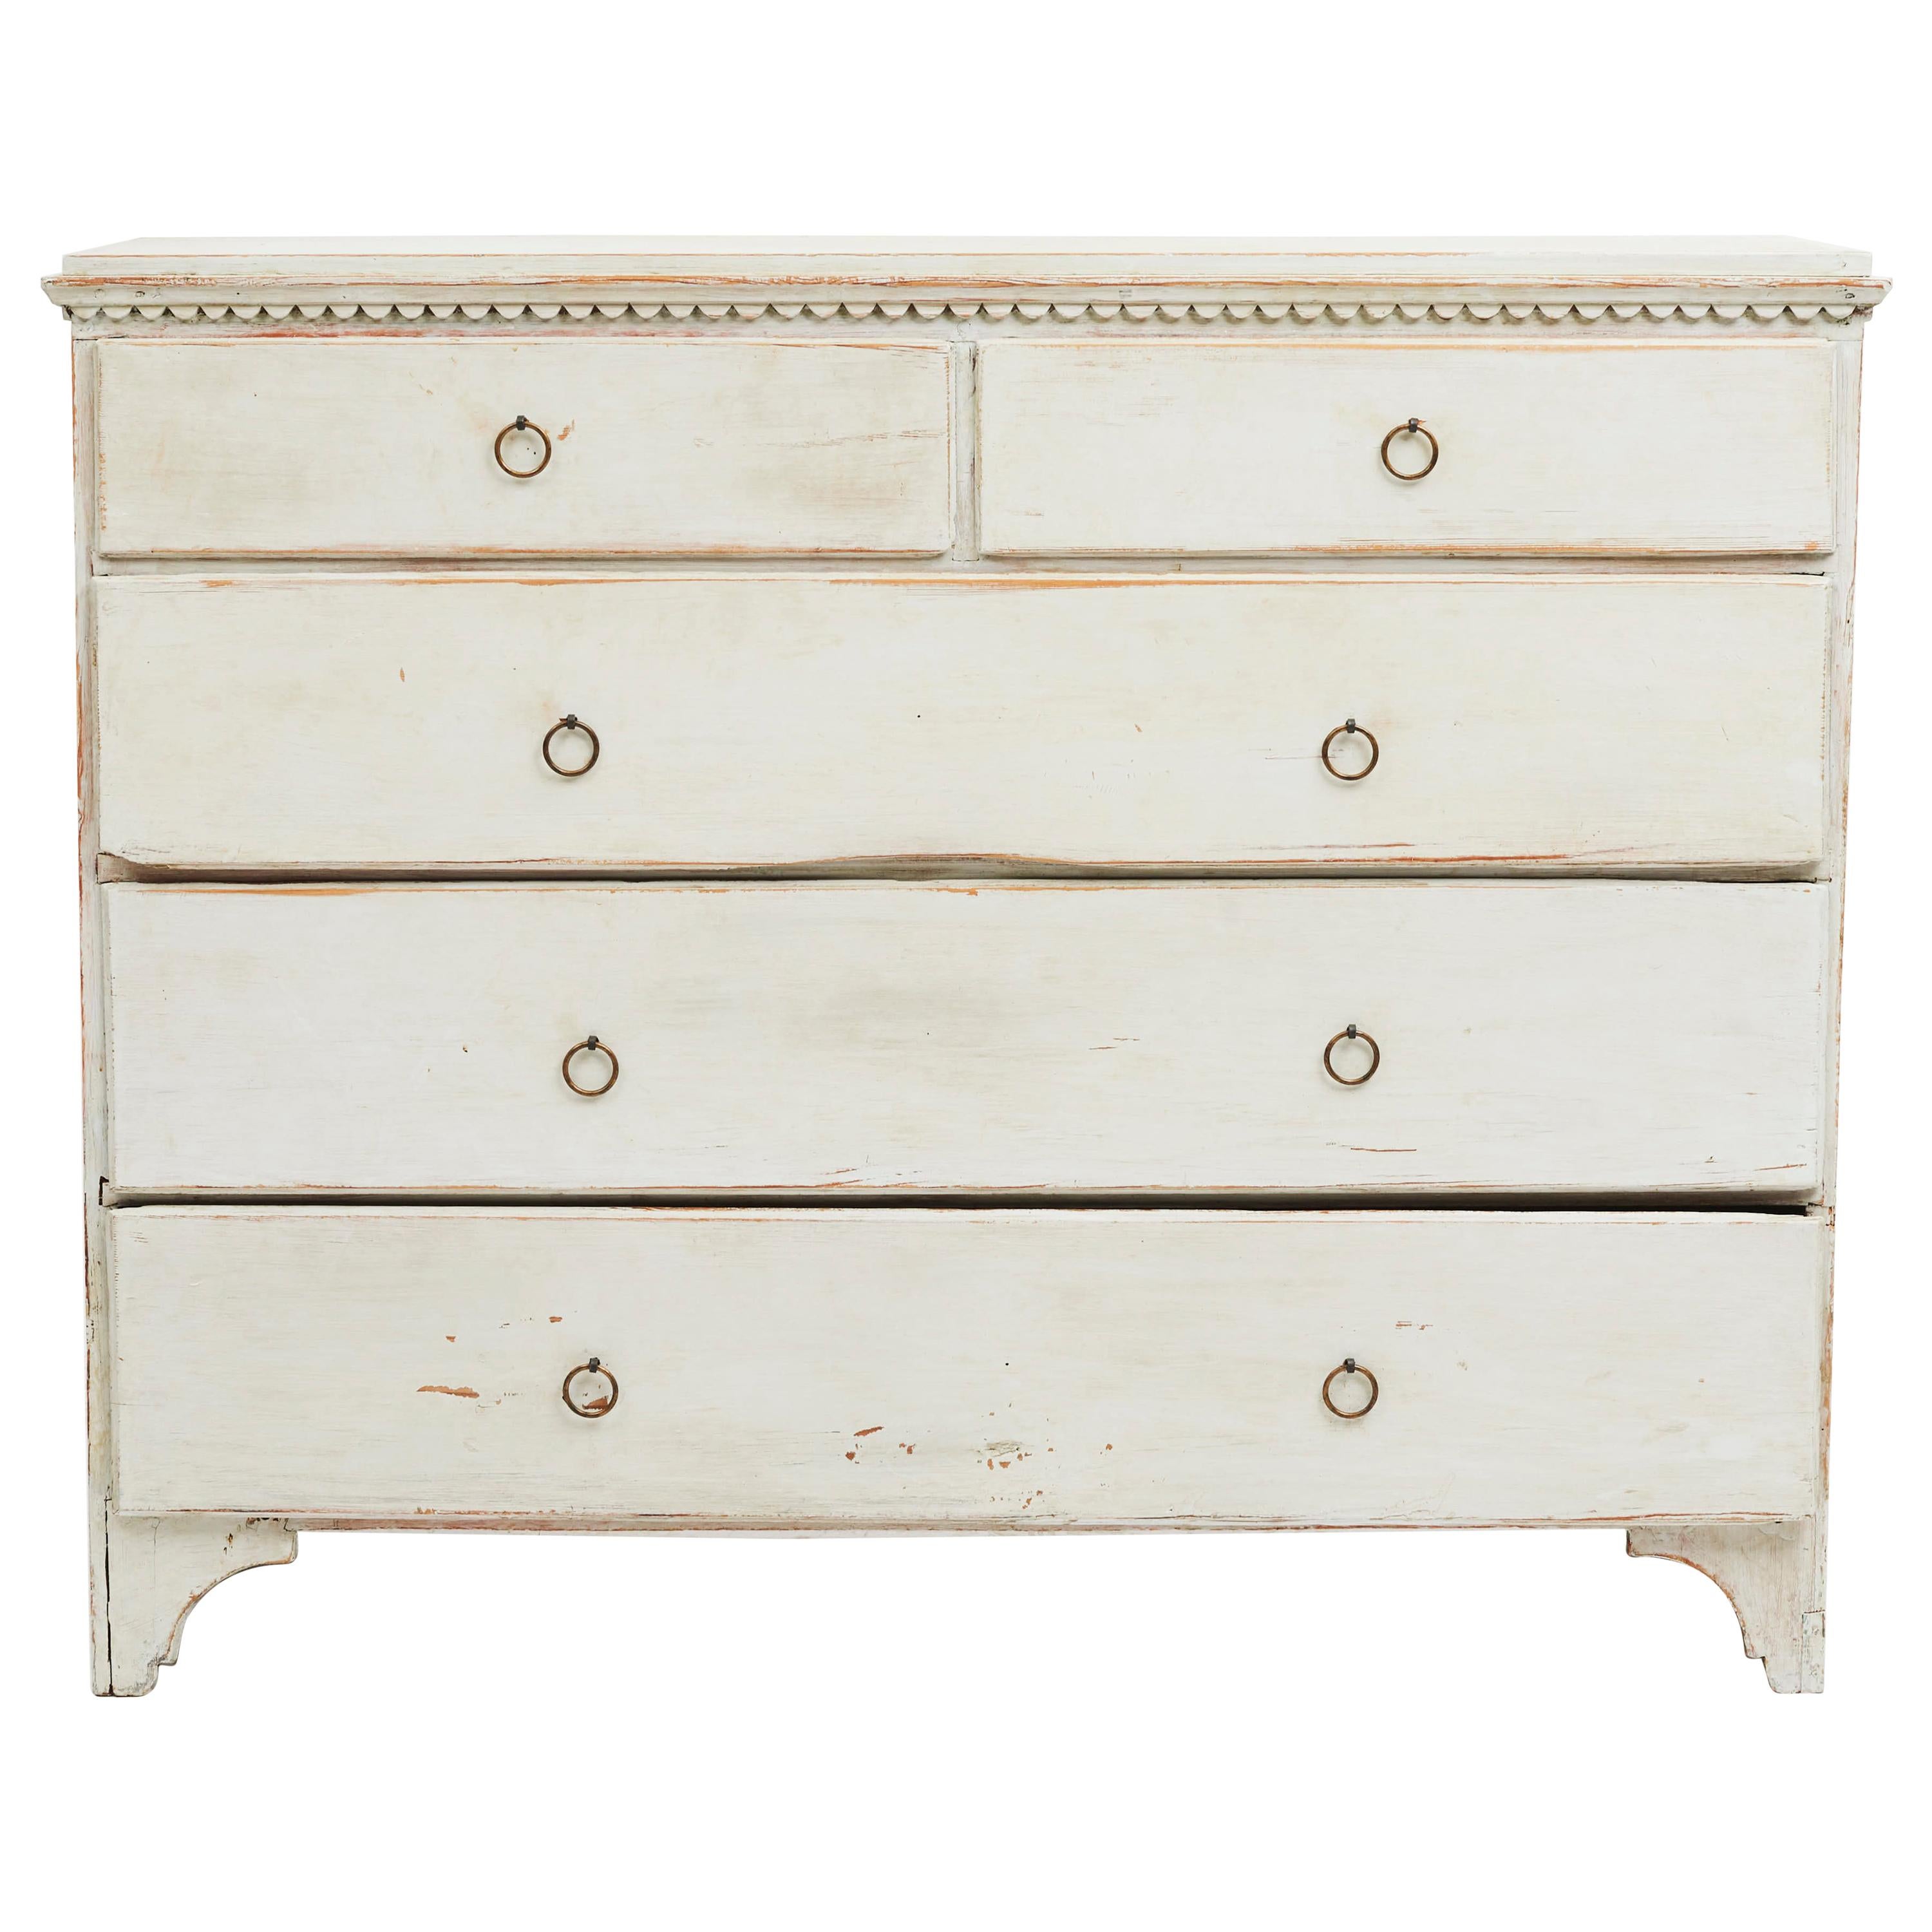 19th Century Swedish Gustavian Grey/ White Painted Commode/ Chest of Drawers